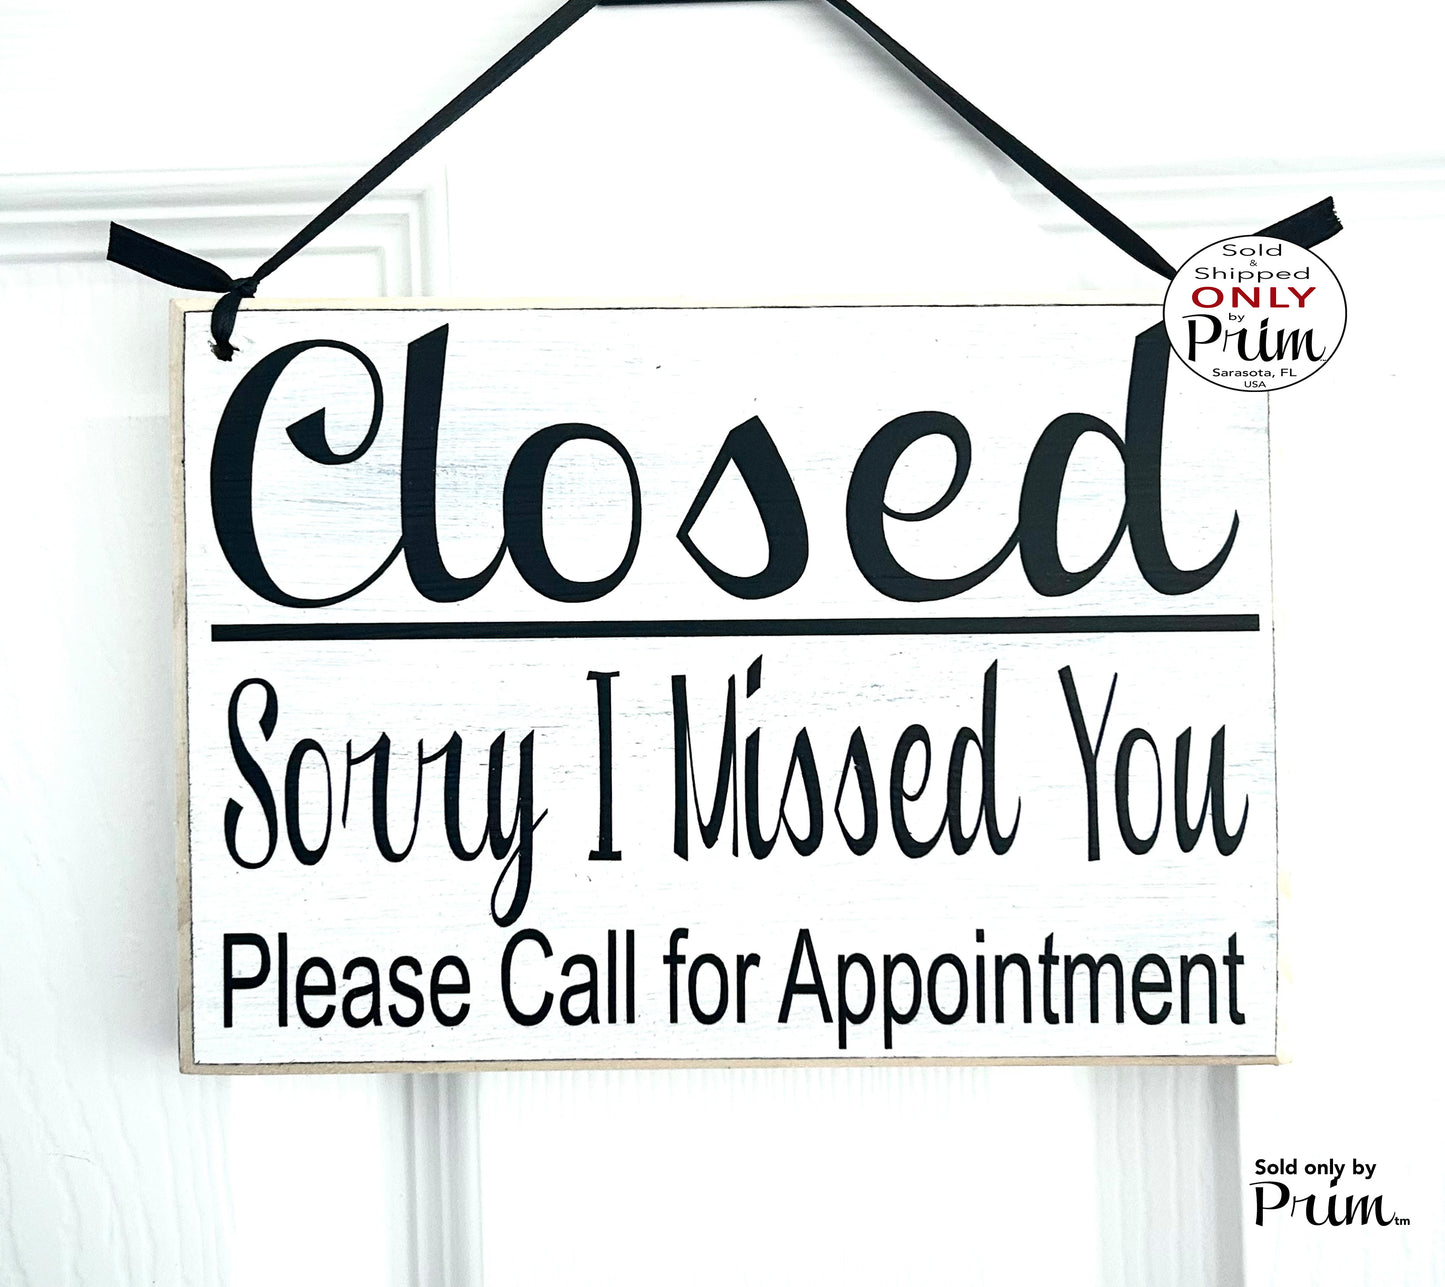 Designs by Prim Closed Sorry I Missed You Call for Appointment Custom Wood Sign | Be Back Soon Come Again Gone for Day Business Hours Office Door Hanger